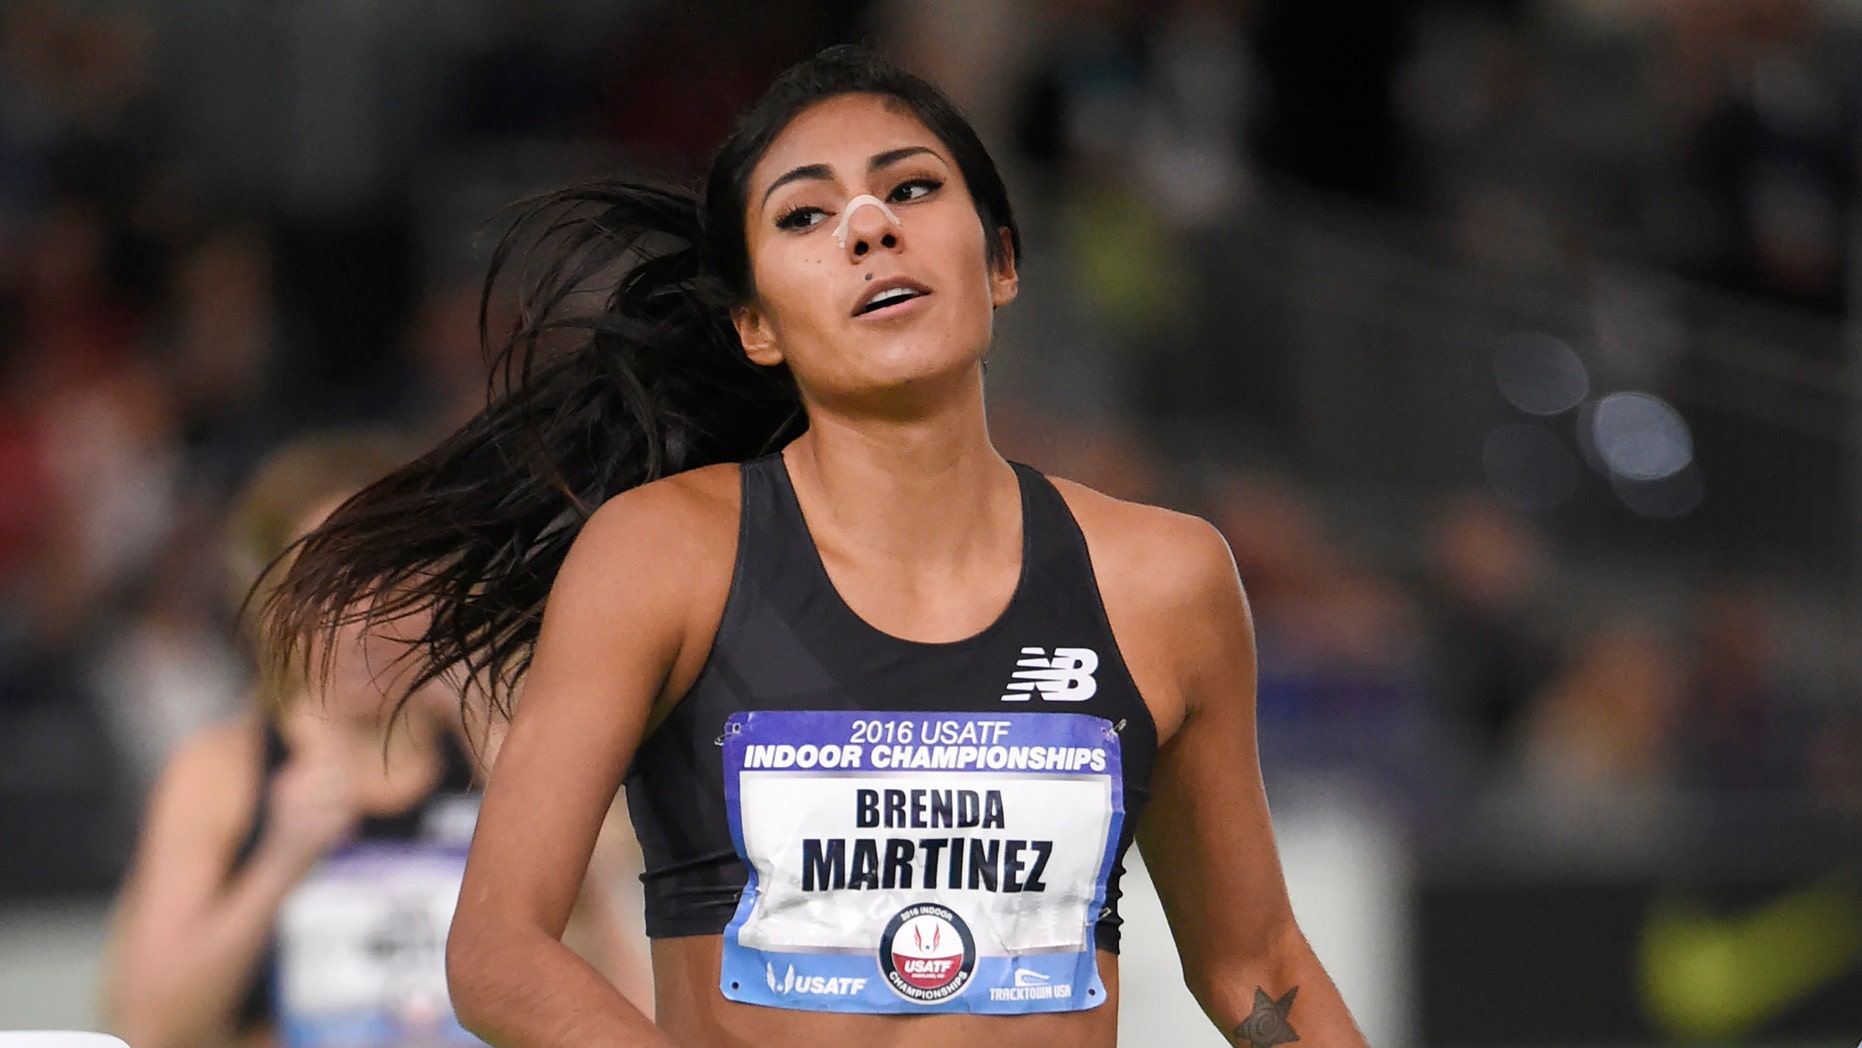 Top U.S. runner Brenda Martinez lashes out about doping: 'We have been robbed' | Fox News1862 x 1048